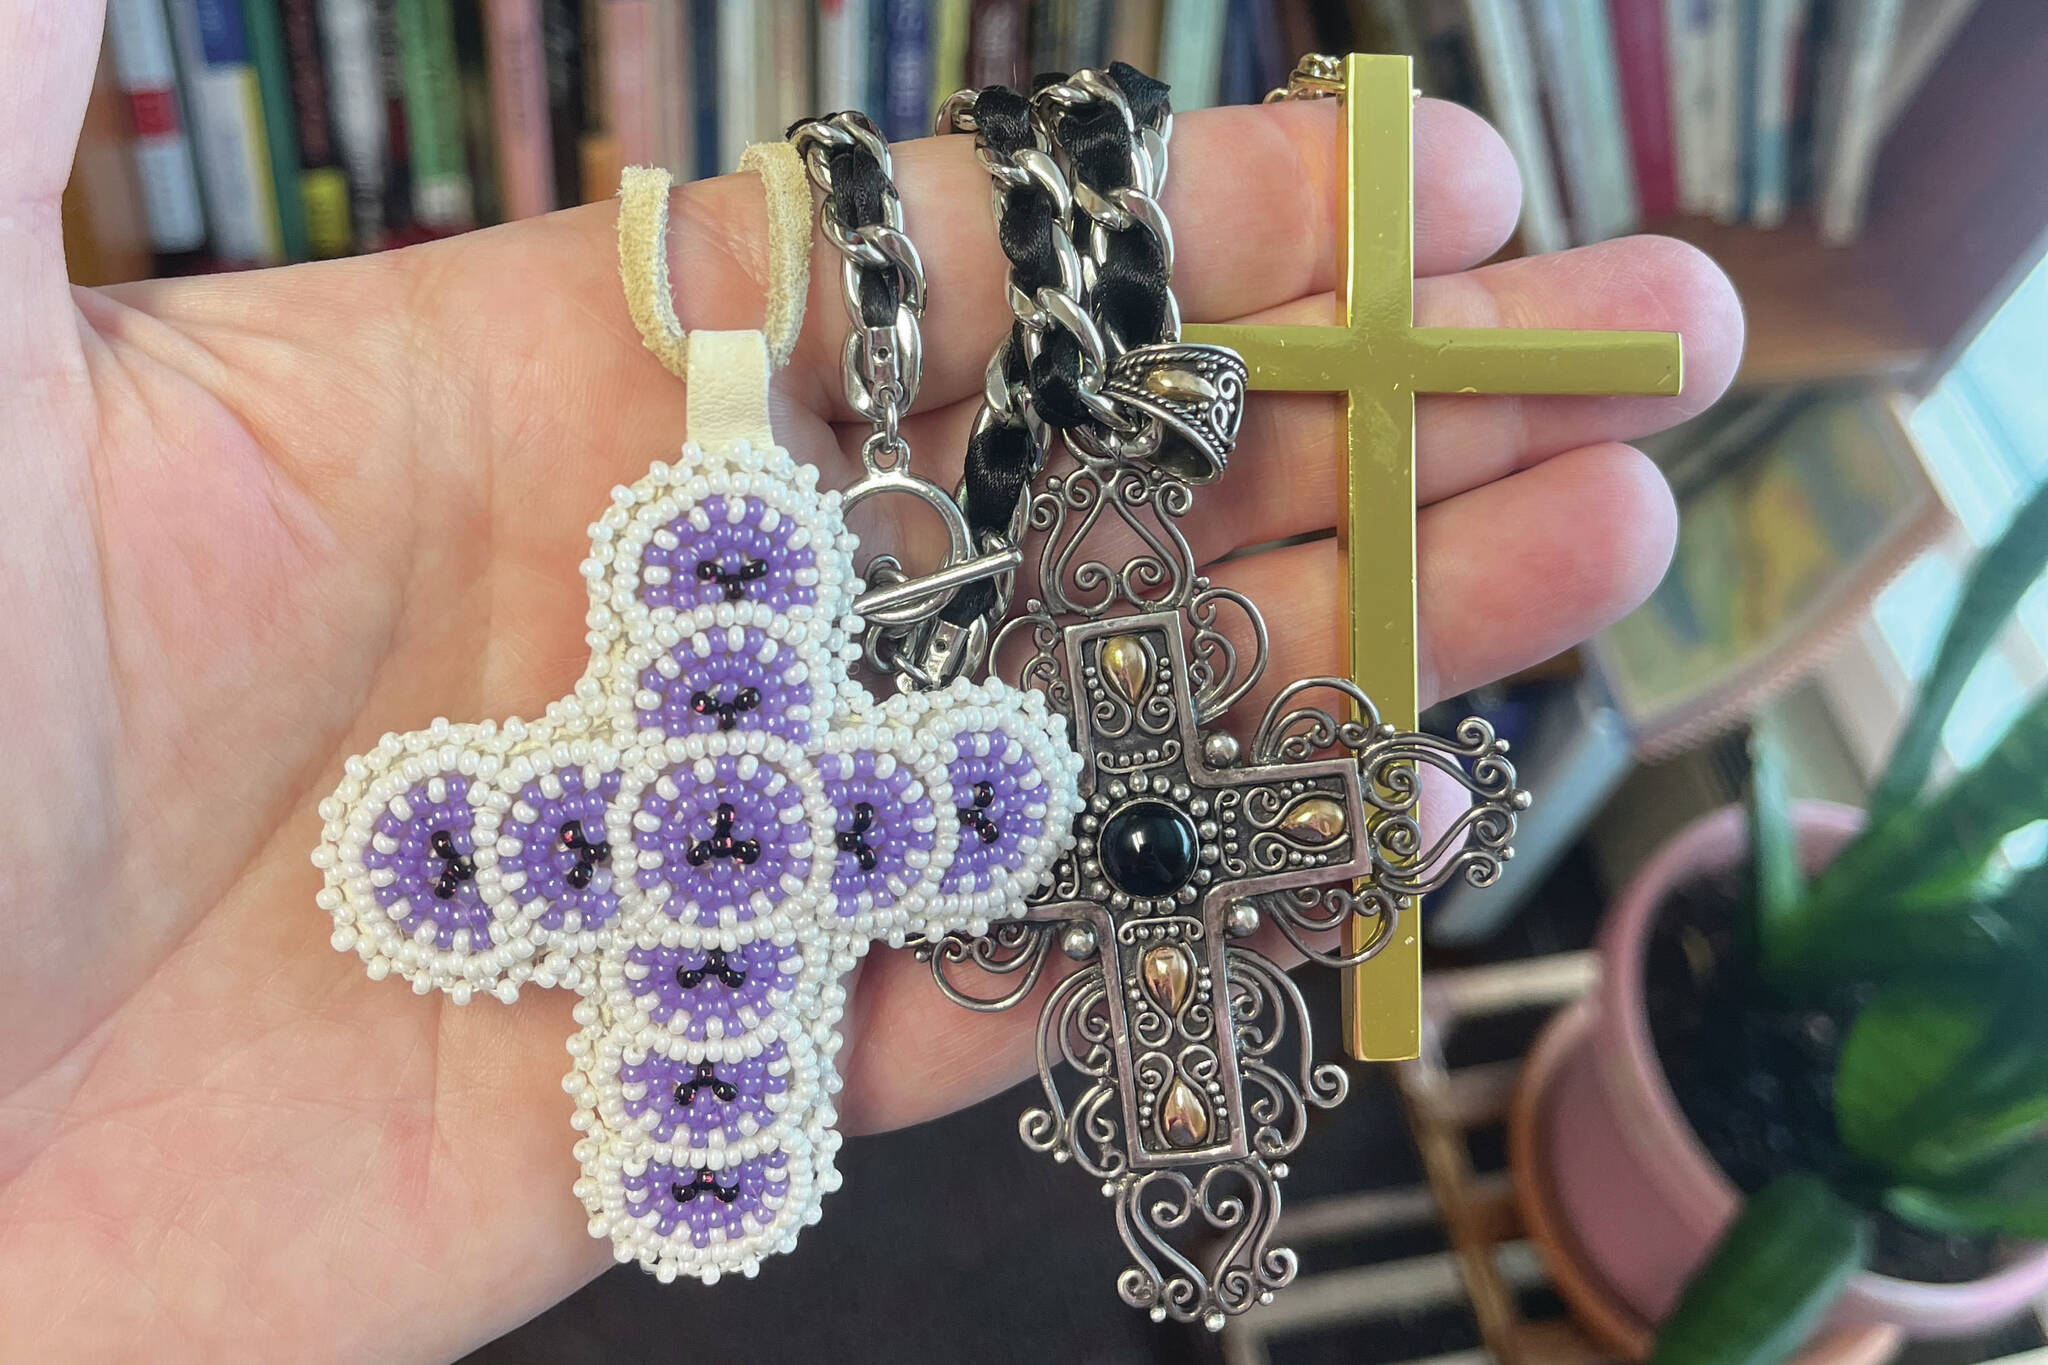 Christ Lutheran Church Pastor Meredith Harber displays necklaces featuring the cross in this undated photo. (Photo by Meredith Harber/courtesy)